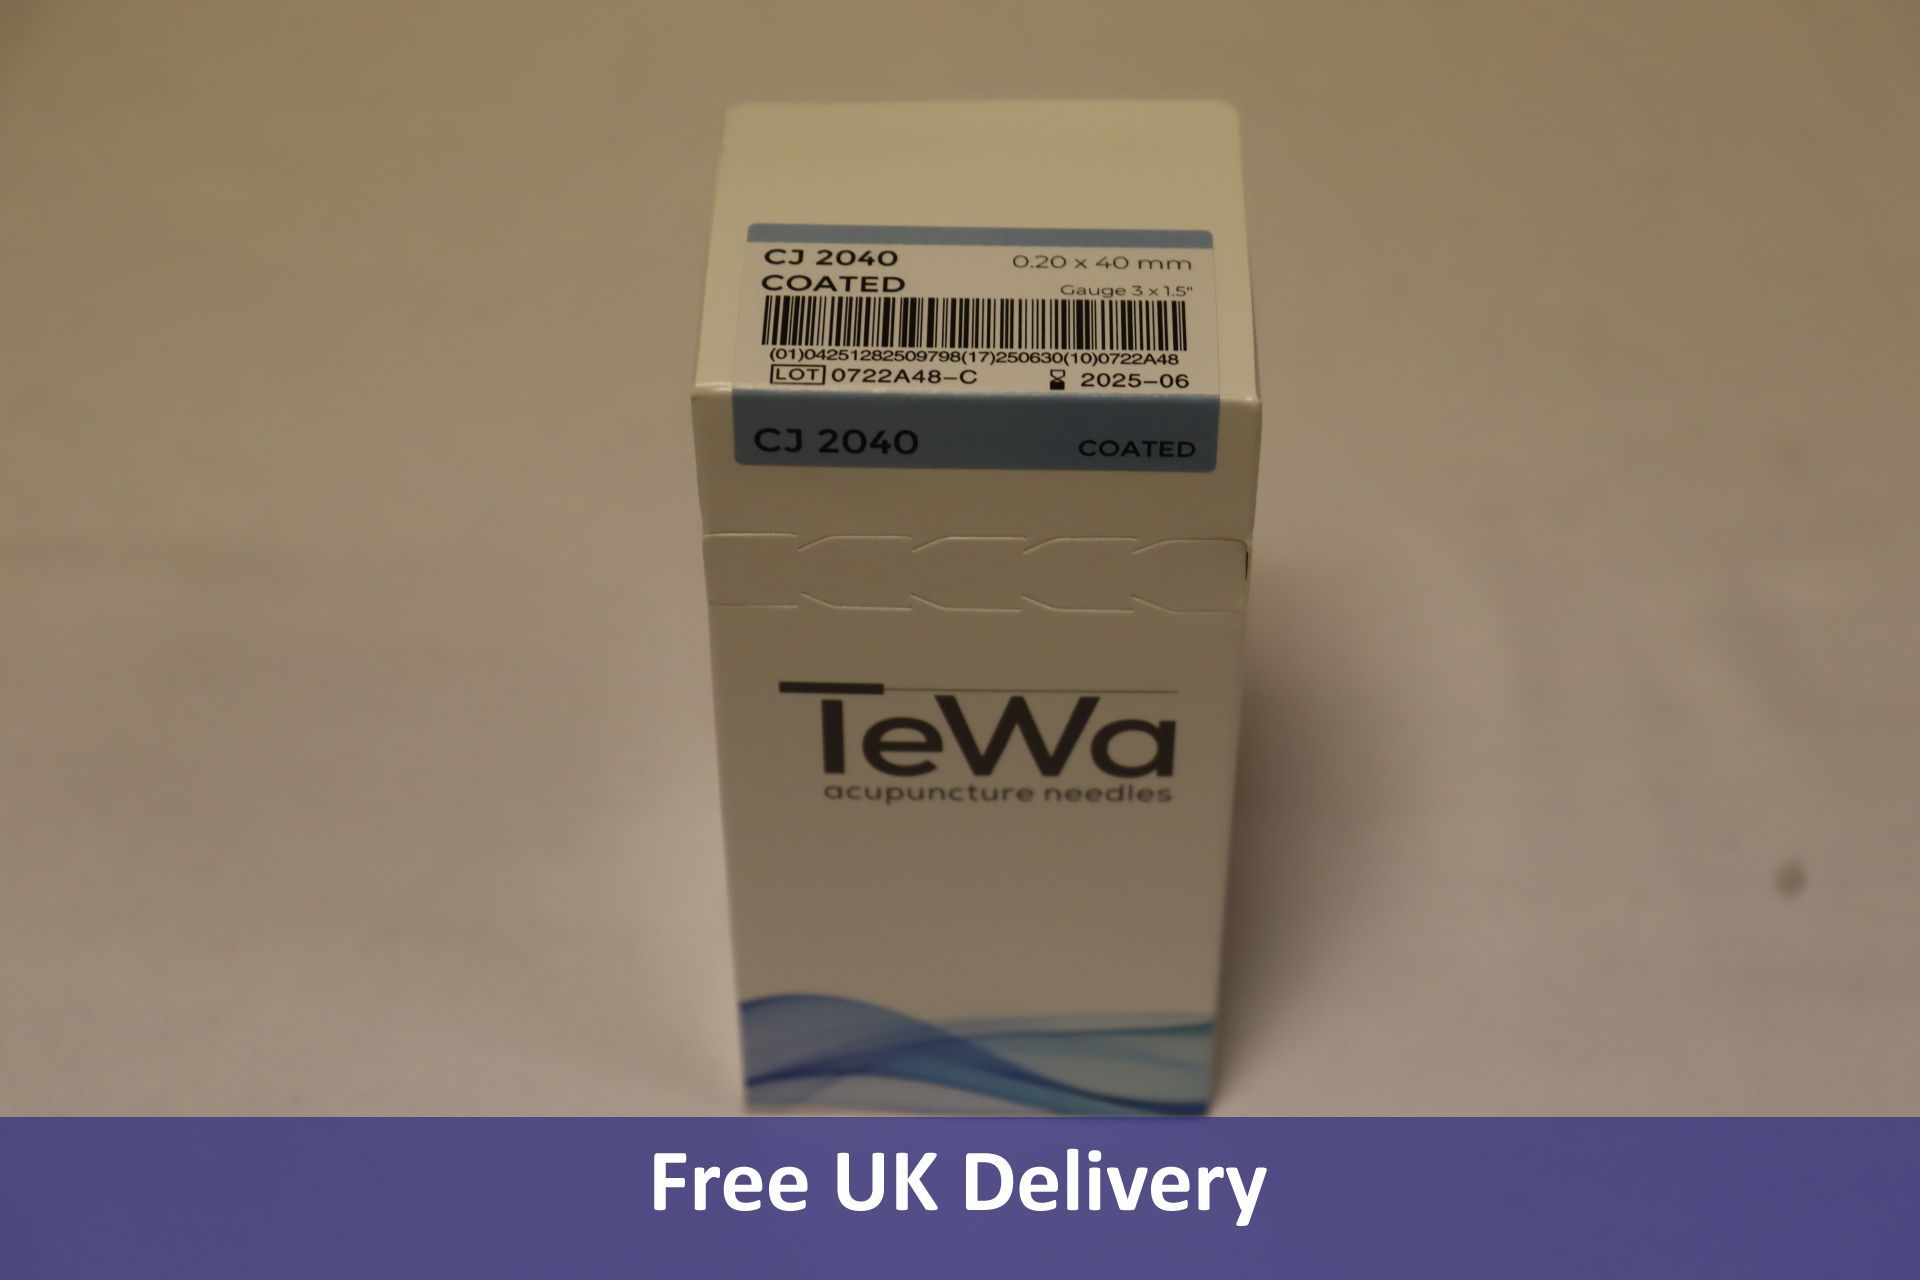 Ten-thousand Tewa Acupuncture Needles, 0.20 x 40mm, in 100 packs of 100 - Image 5 of 10